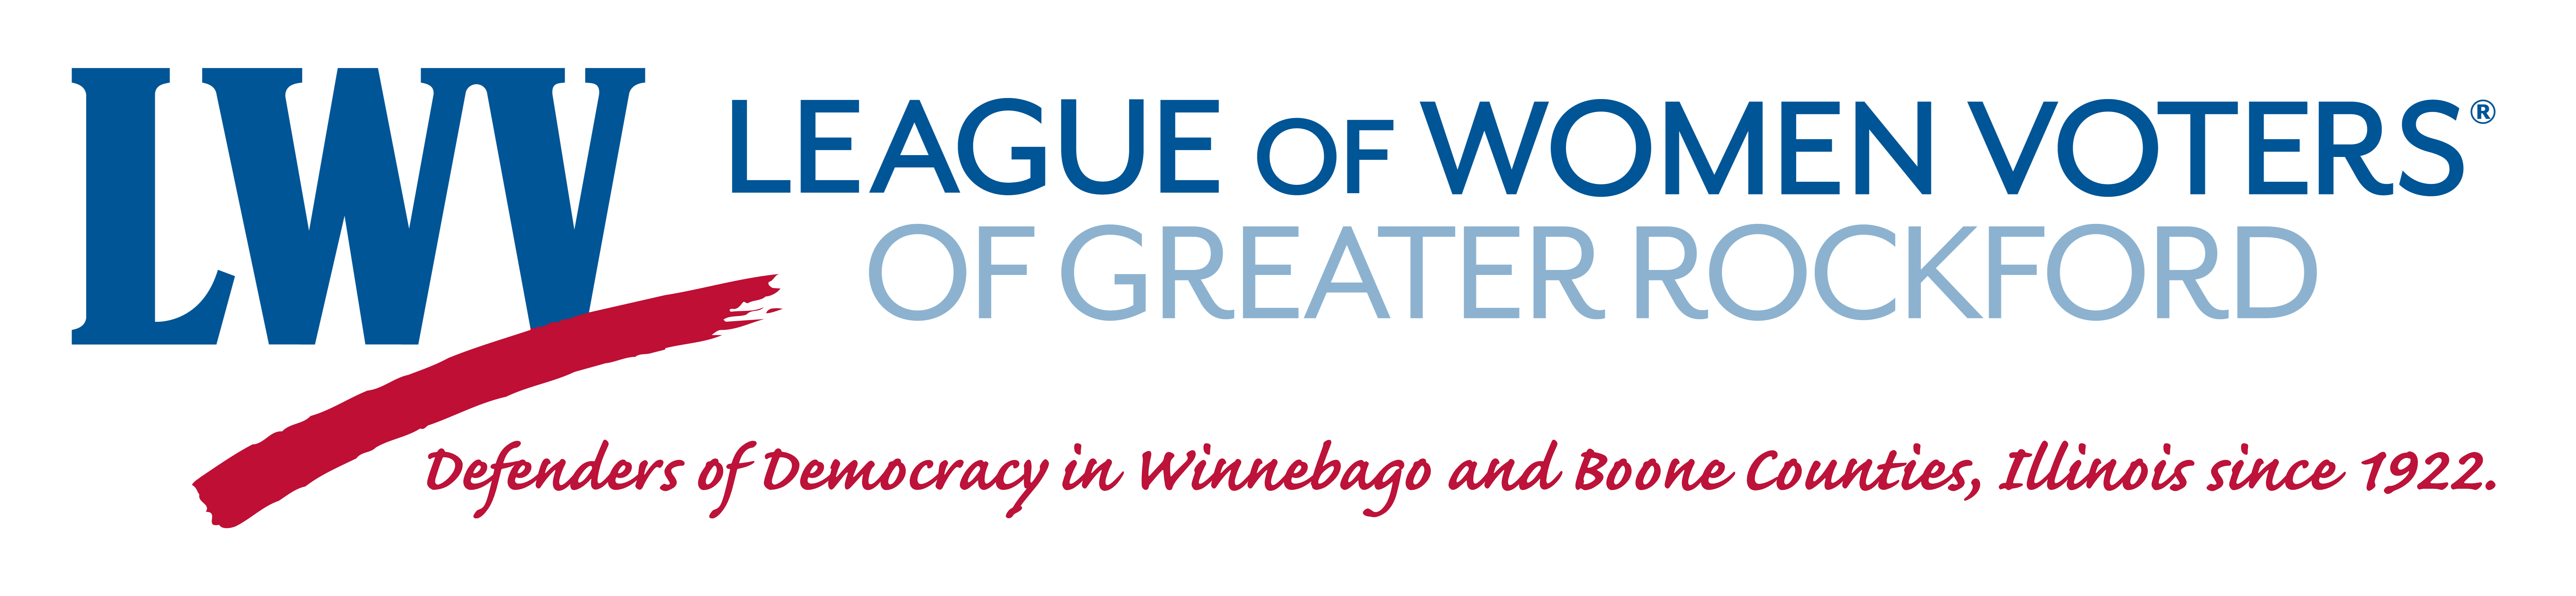 League of Women Voters of Greater Rockford, Illinois